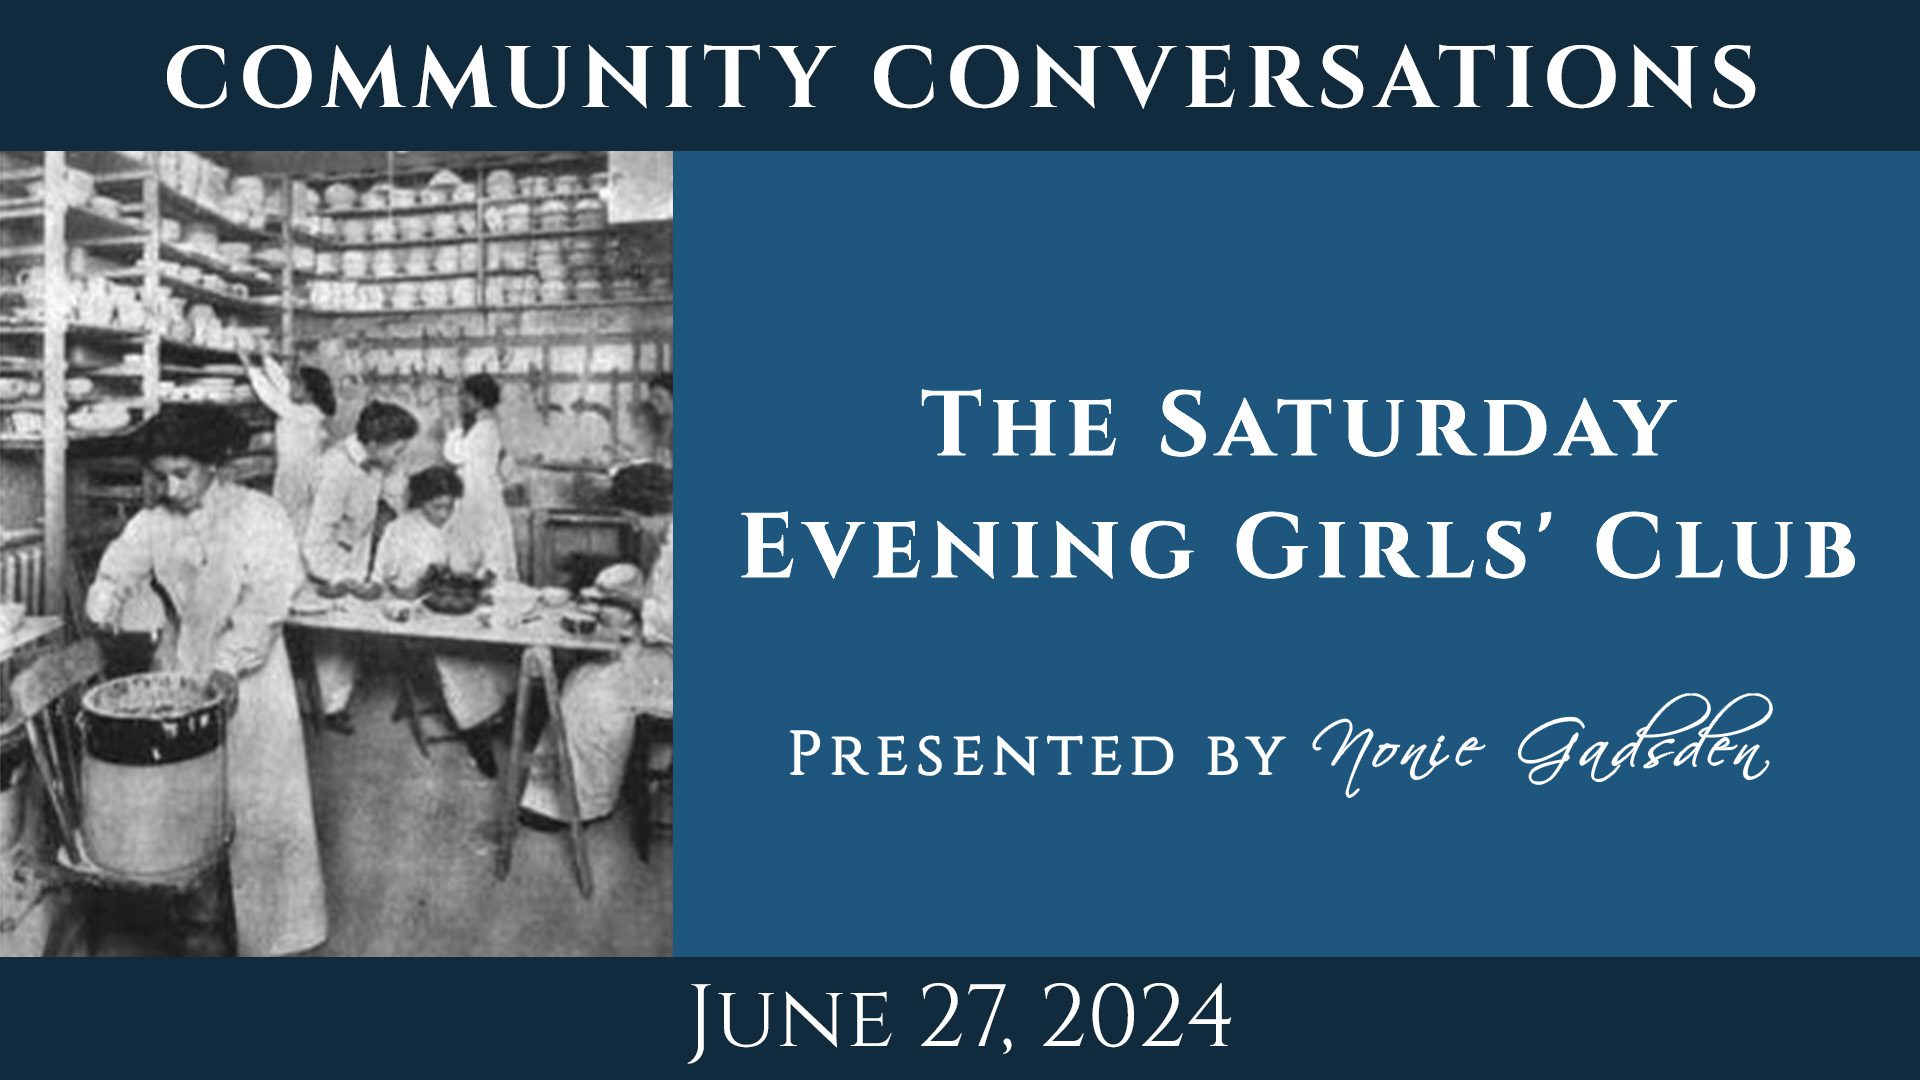 Get ready for our event on June 27, 2024, as we share a glimpse from the past with a historic photo of women at a pottery workshop. Join us for "The Saturday Evening Girls' Club" and dive into an era of beautiful craftsmanship. Don't miss it!